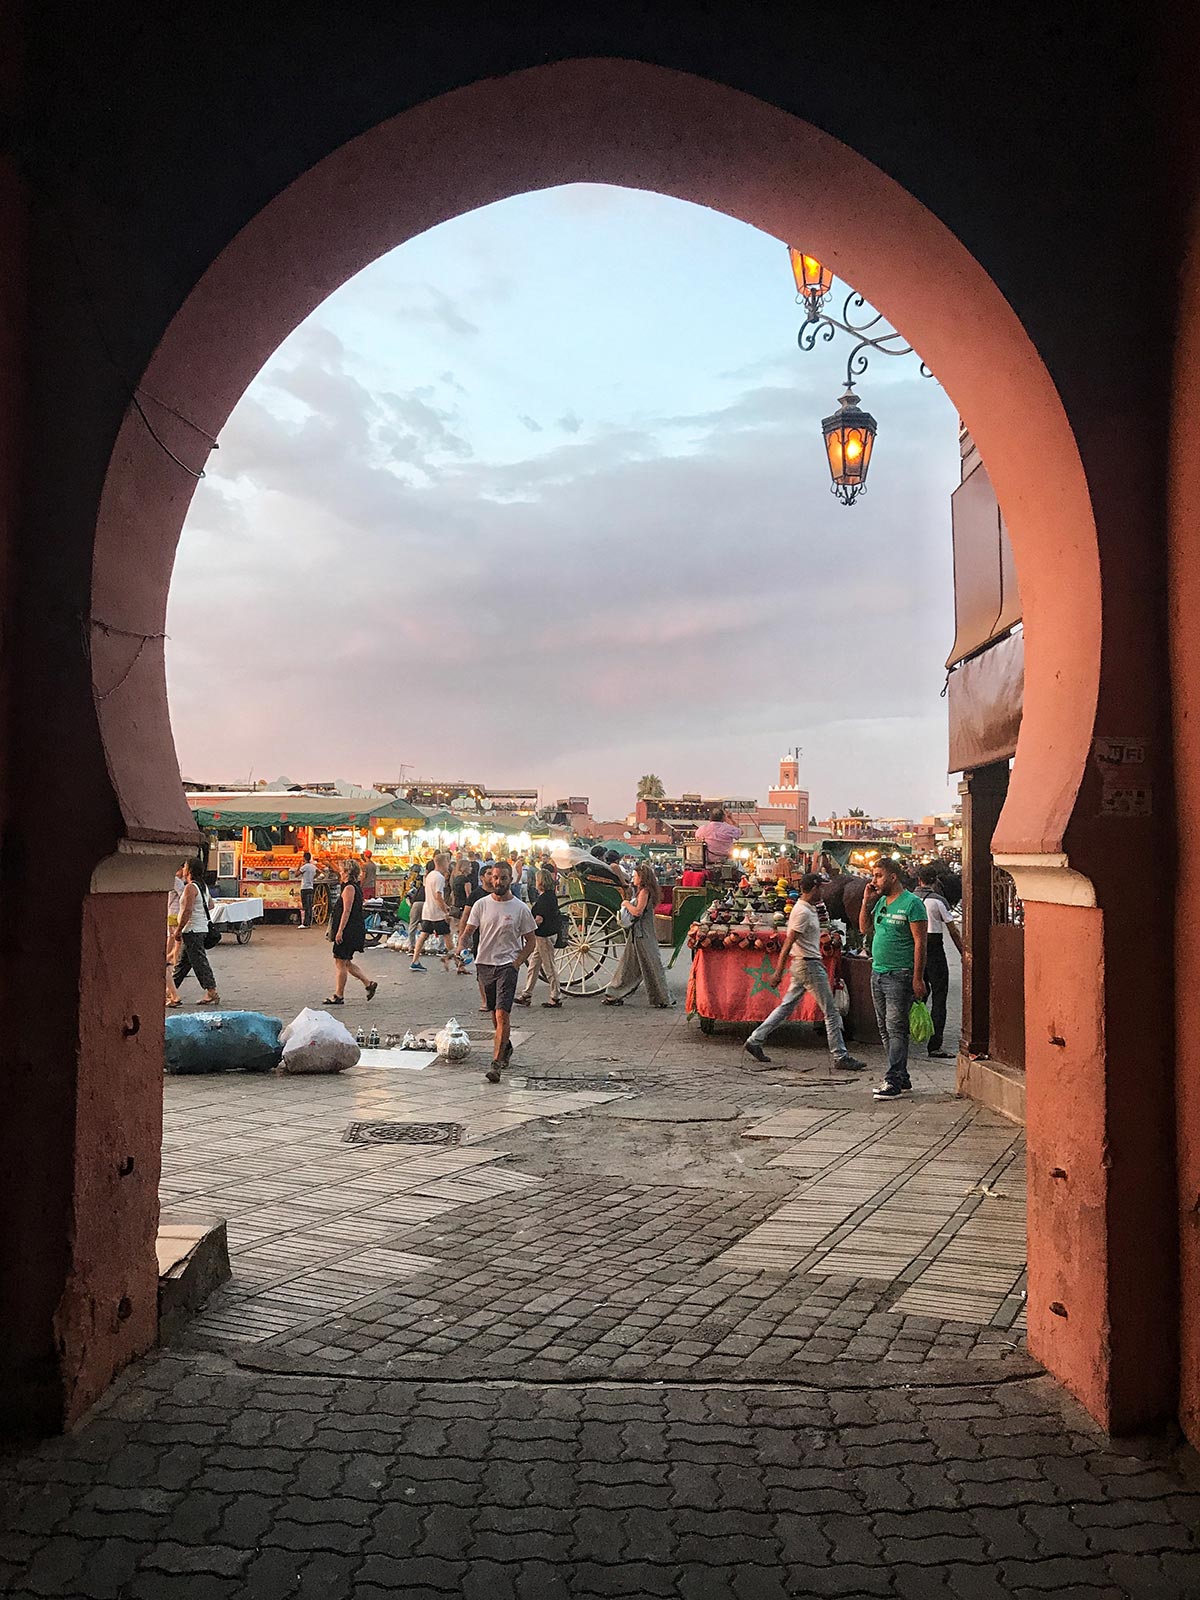 Sunset at the market in Marrakesh, Morocco. Being attacked by a man with a snake